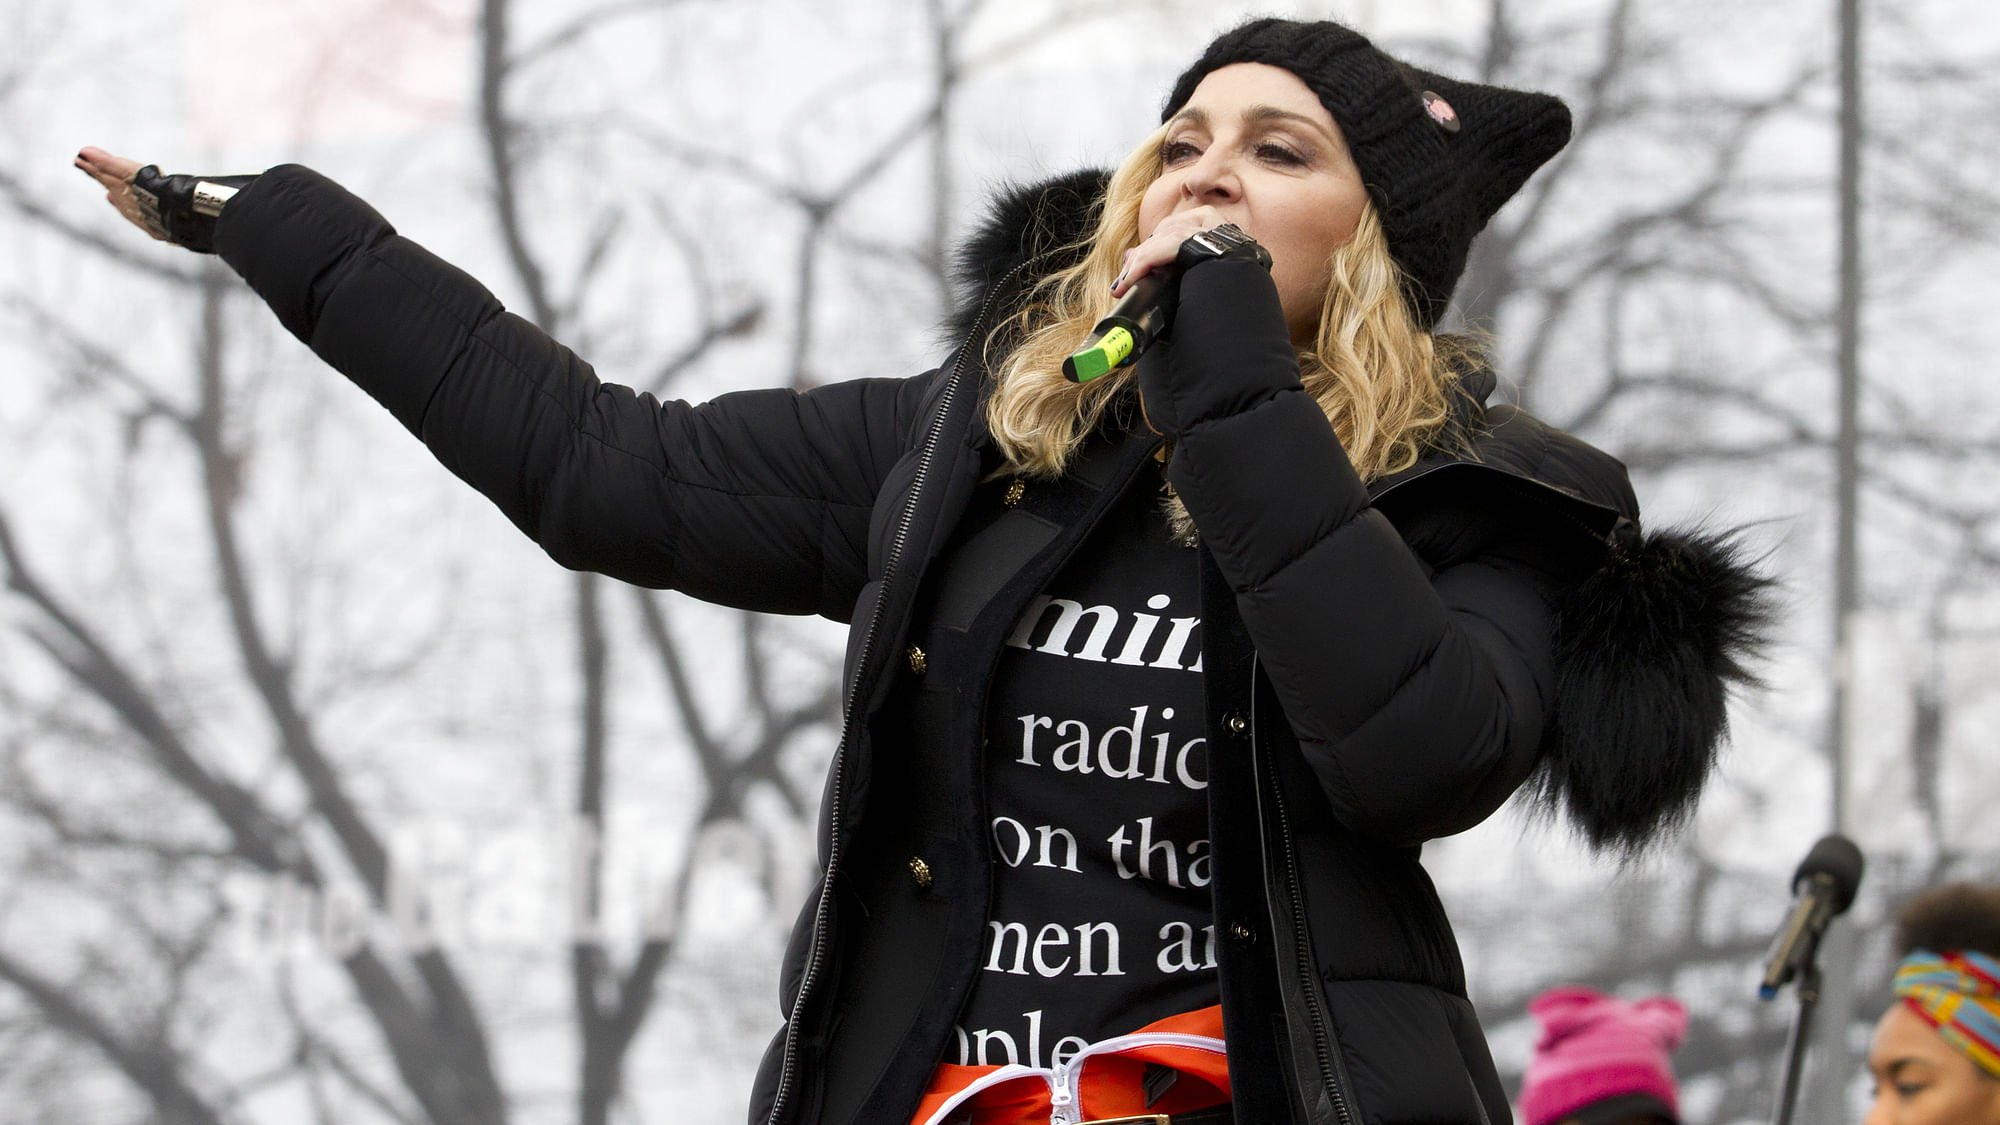 Madonna makes a speech at a protest march. (Photo: AP)